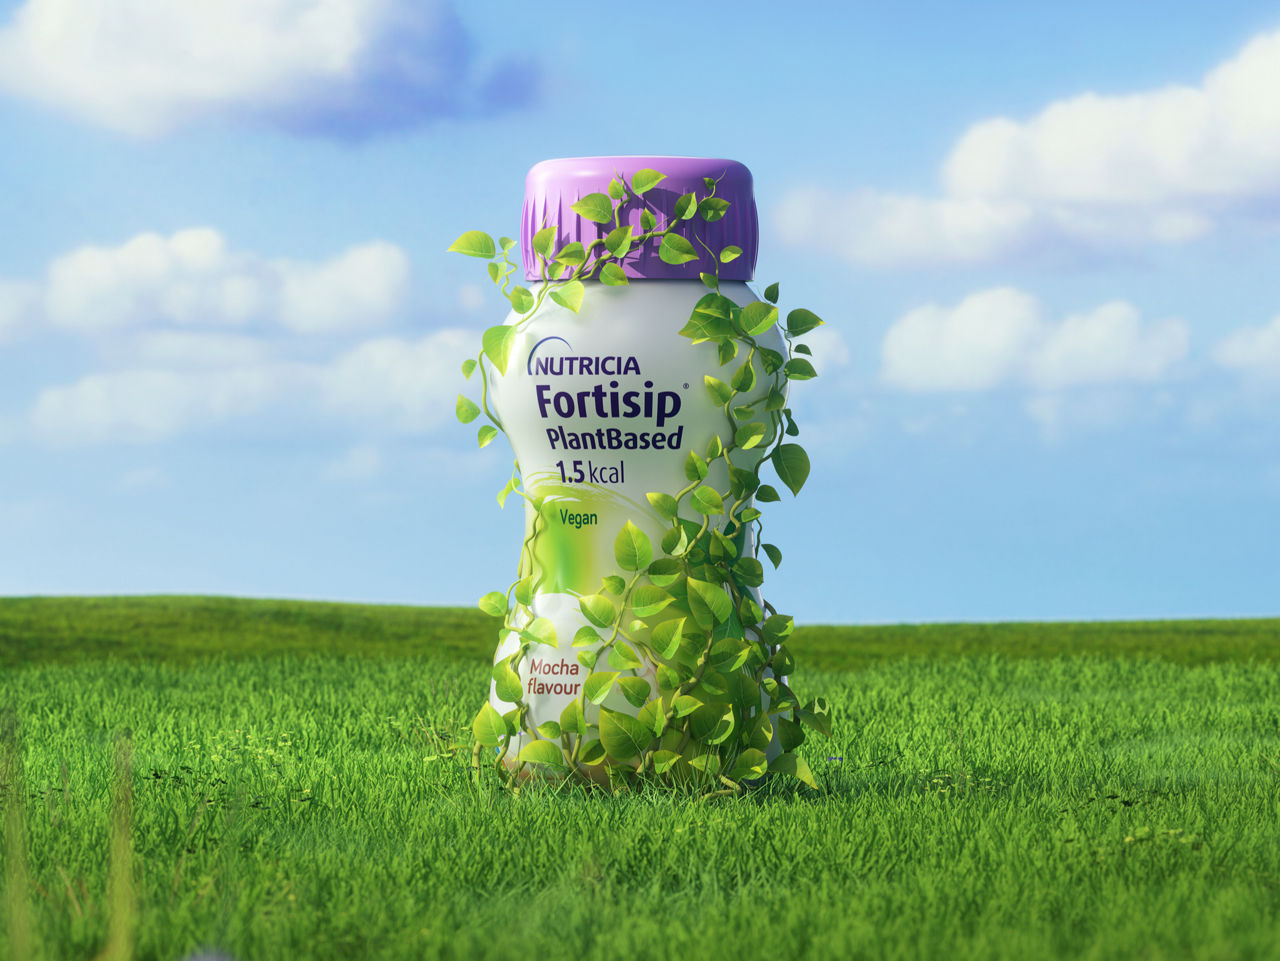 Introducing the new Fortisip Plant based